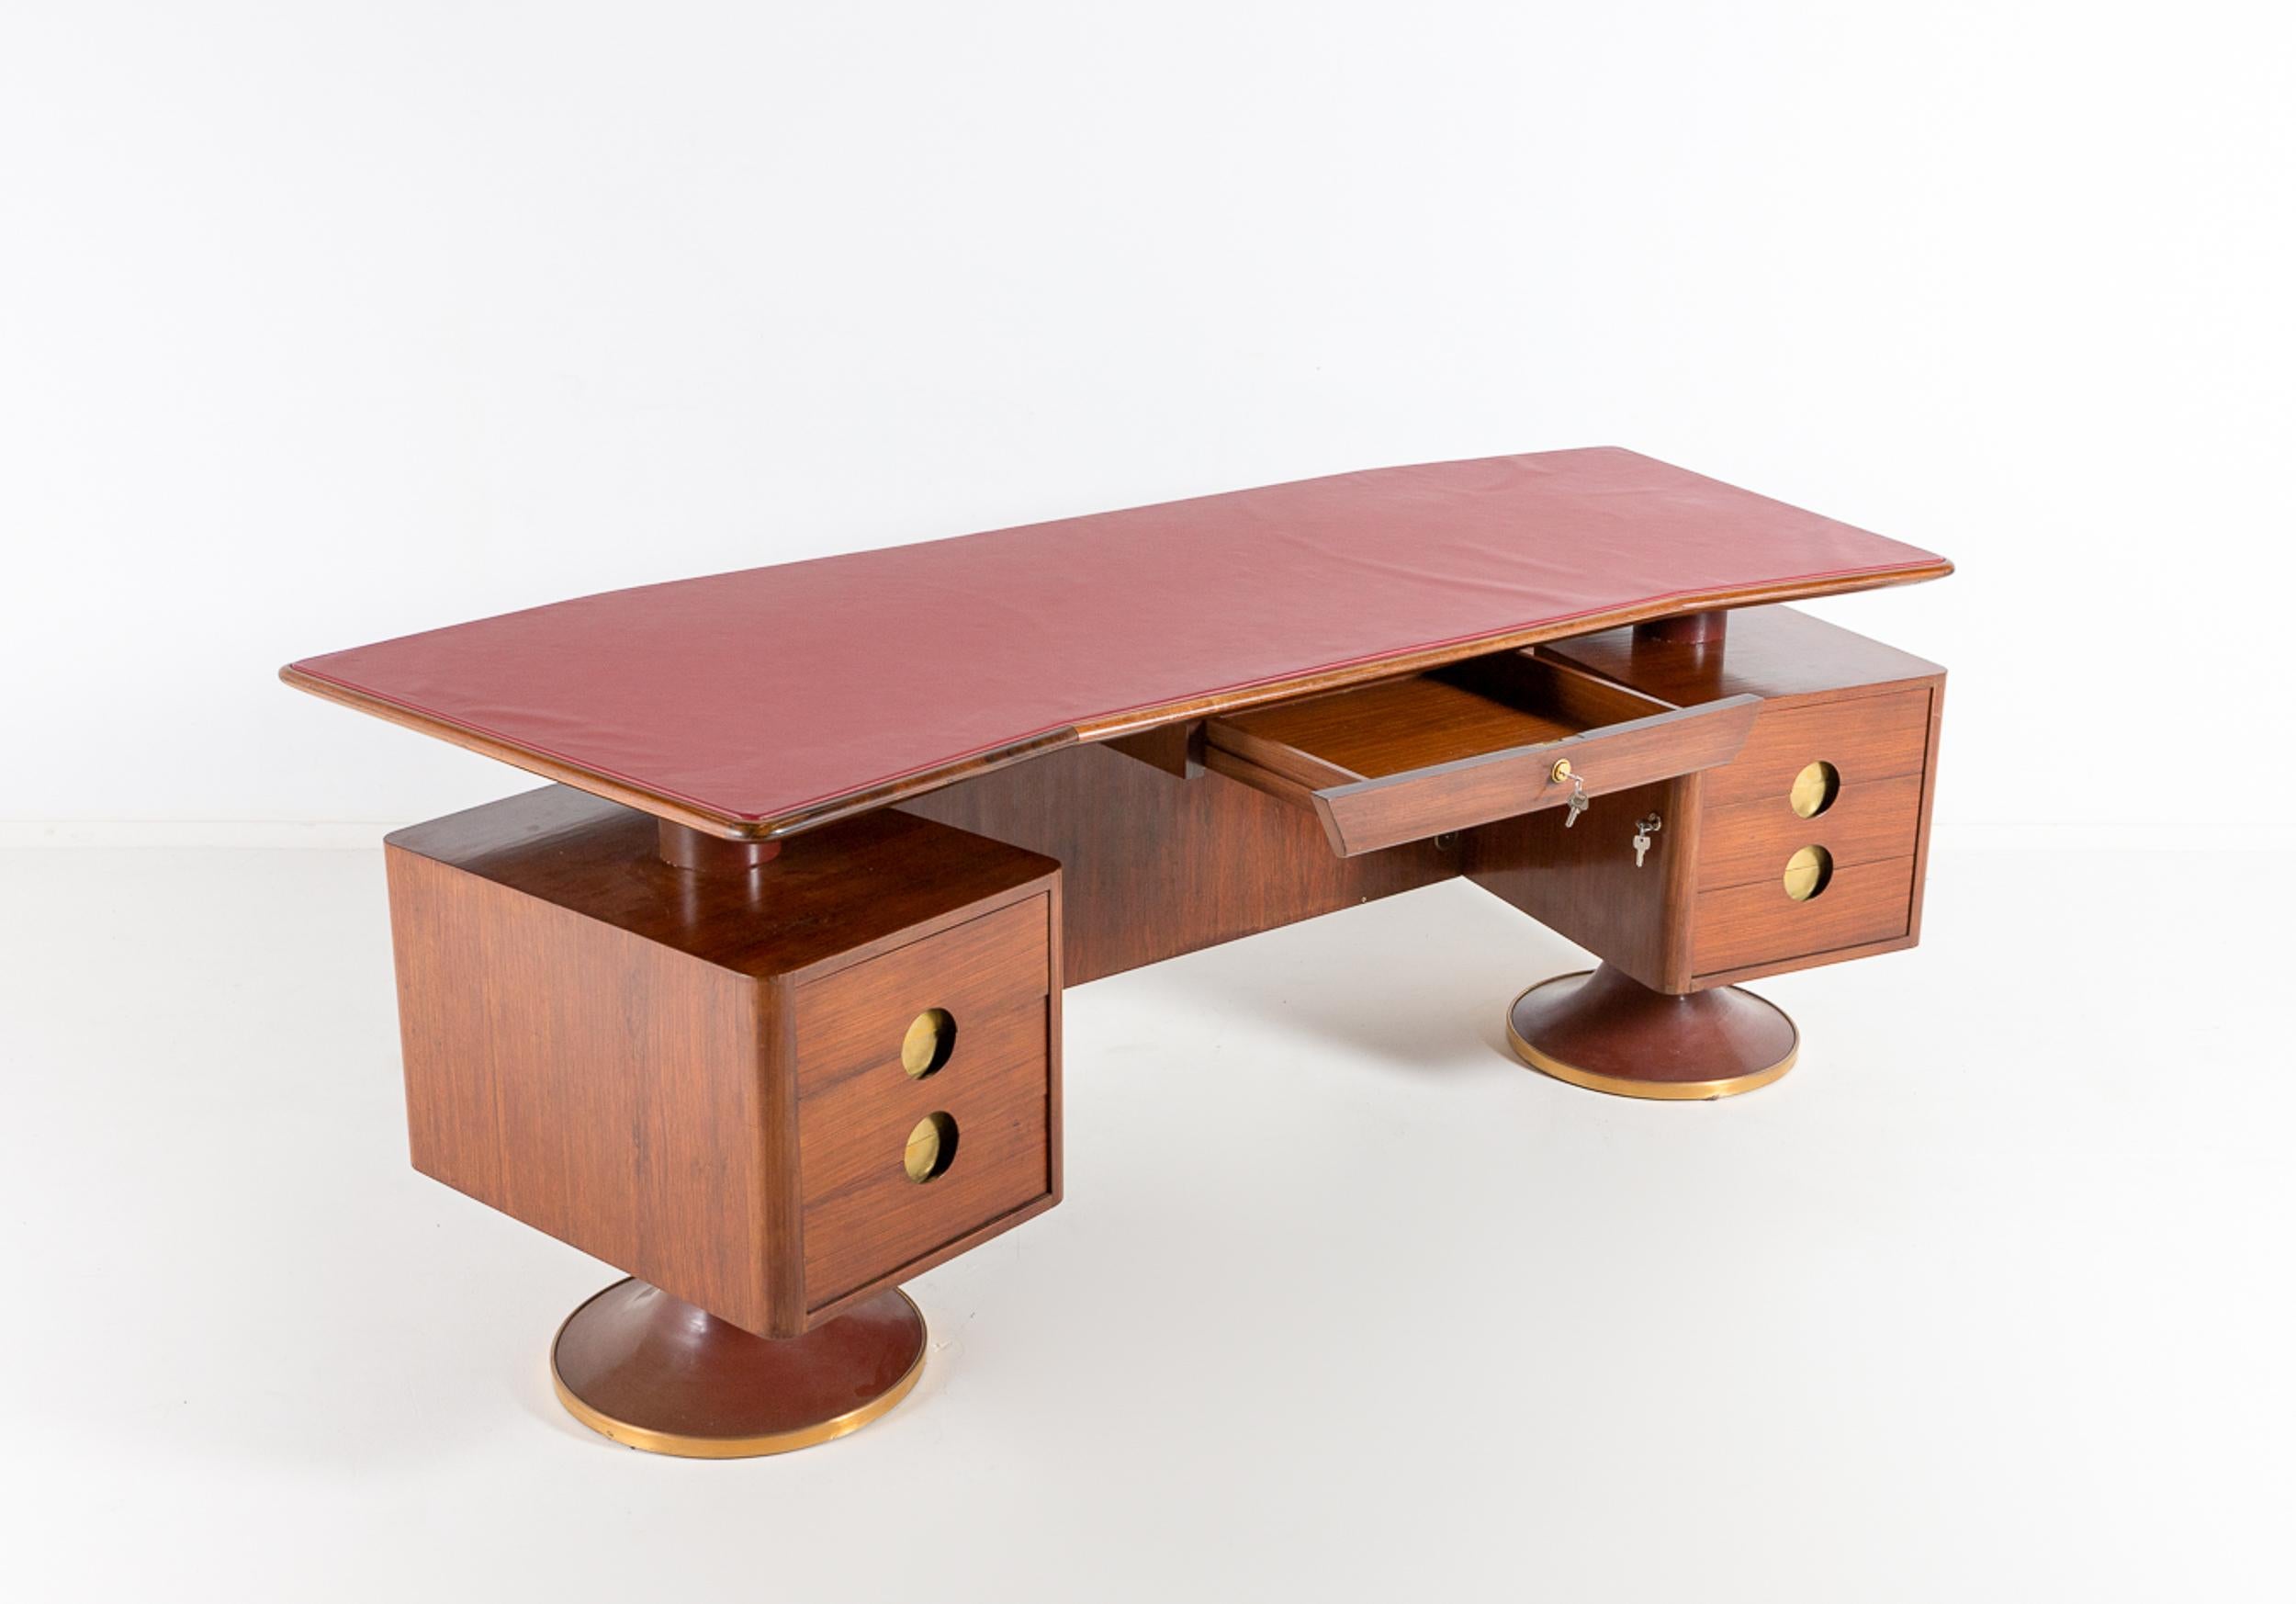 A superb Italian walnut and rosewood desk with matching rosewood and leather armchair, made to measure for the villa of an Italian executive in 1960. The floating boomerang shaped top is covered with the original red leather. The front of the desk